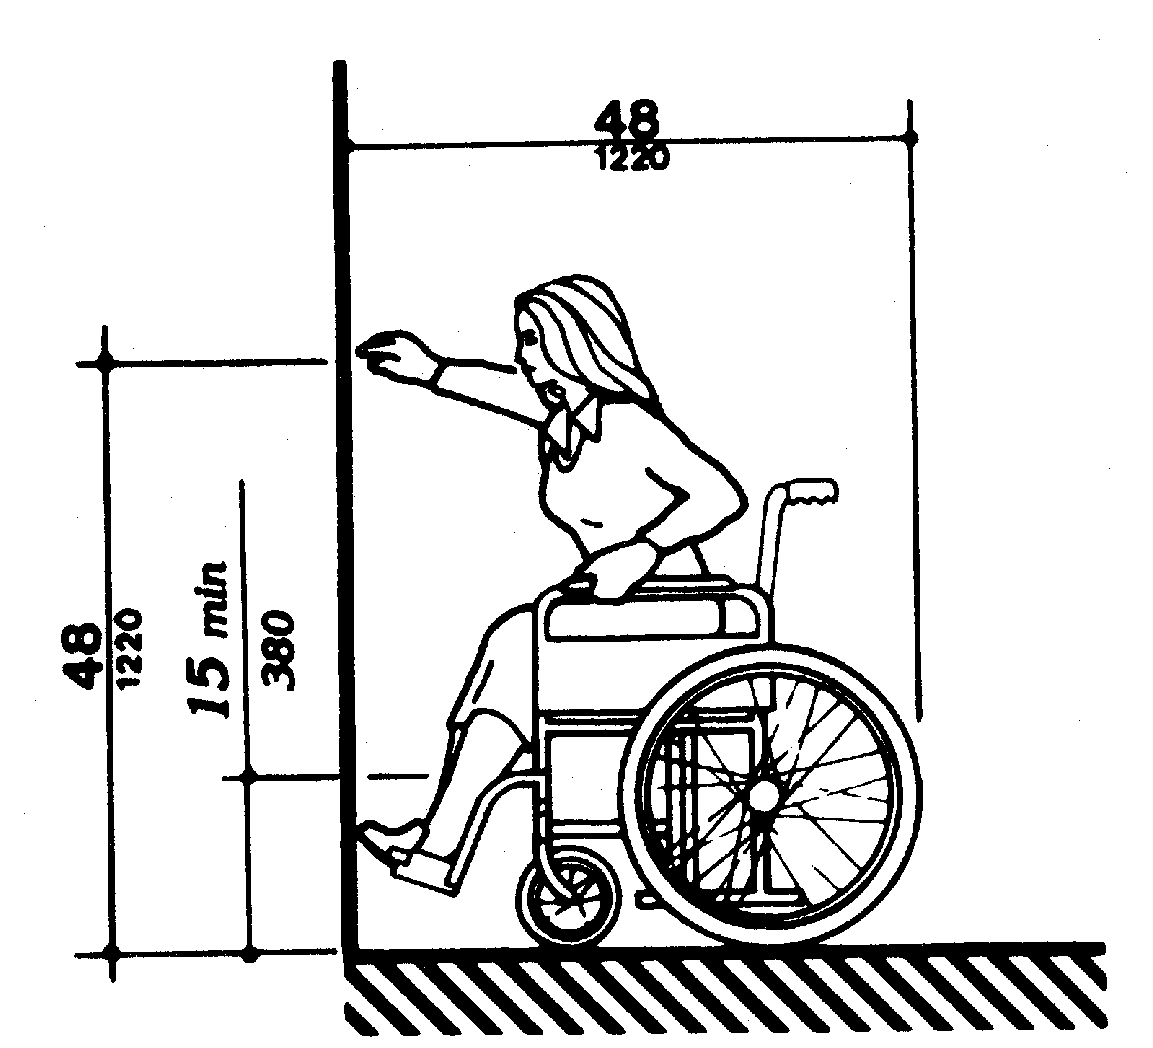 Line drawing of a person seated in a wheelchair reaching forward. Maximum height for forward reach is 48 inches, minimum height is 15 inches. Depth of clear floor space for a forward reach is 48 inches.